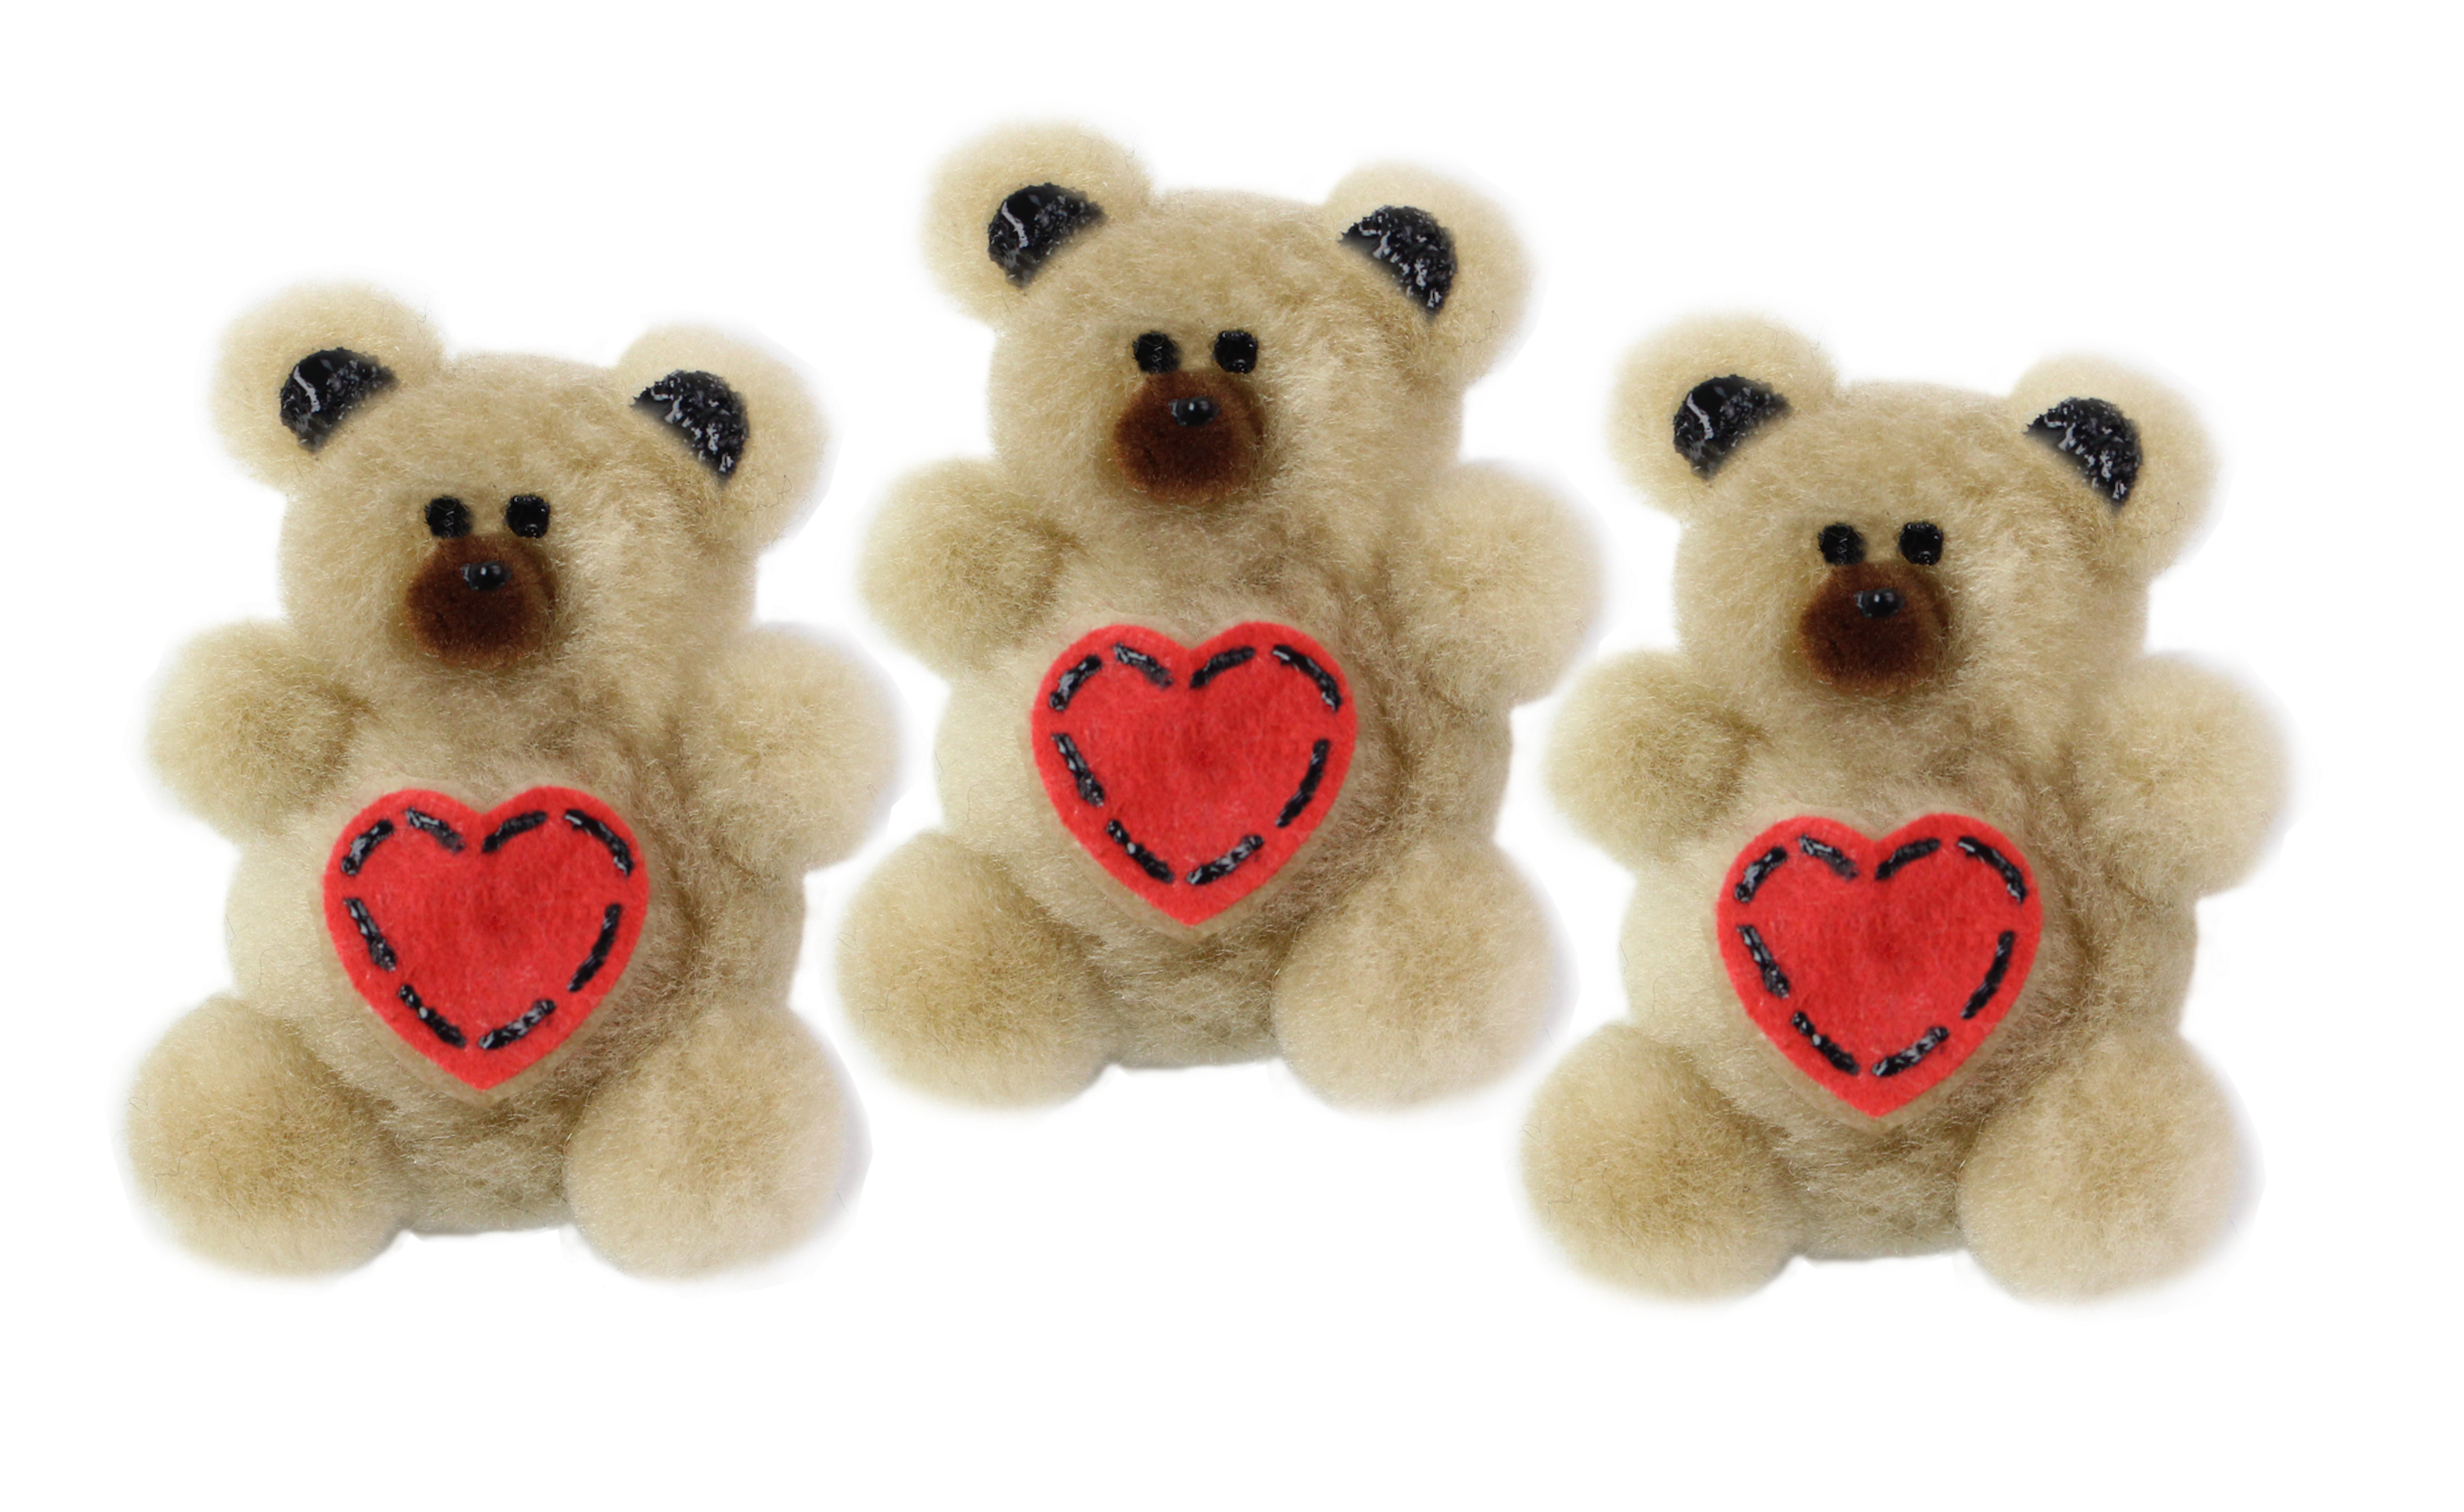 Make a cute DIY Pom Pom Teddy Bear to share with your dolls and friends!